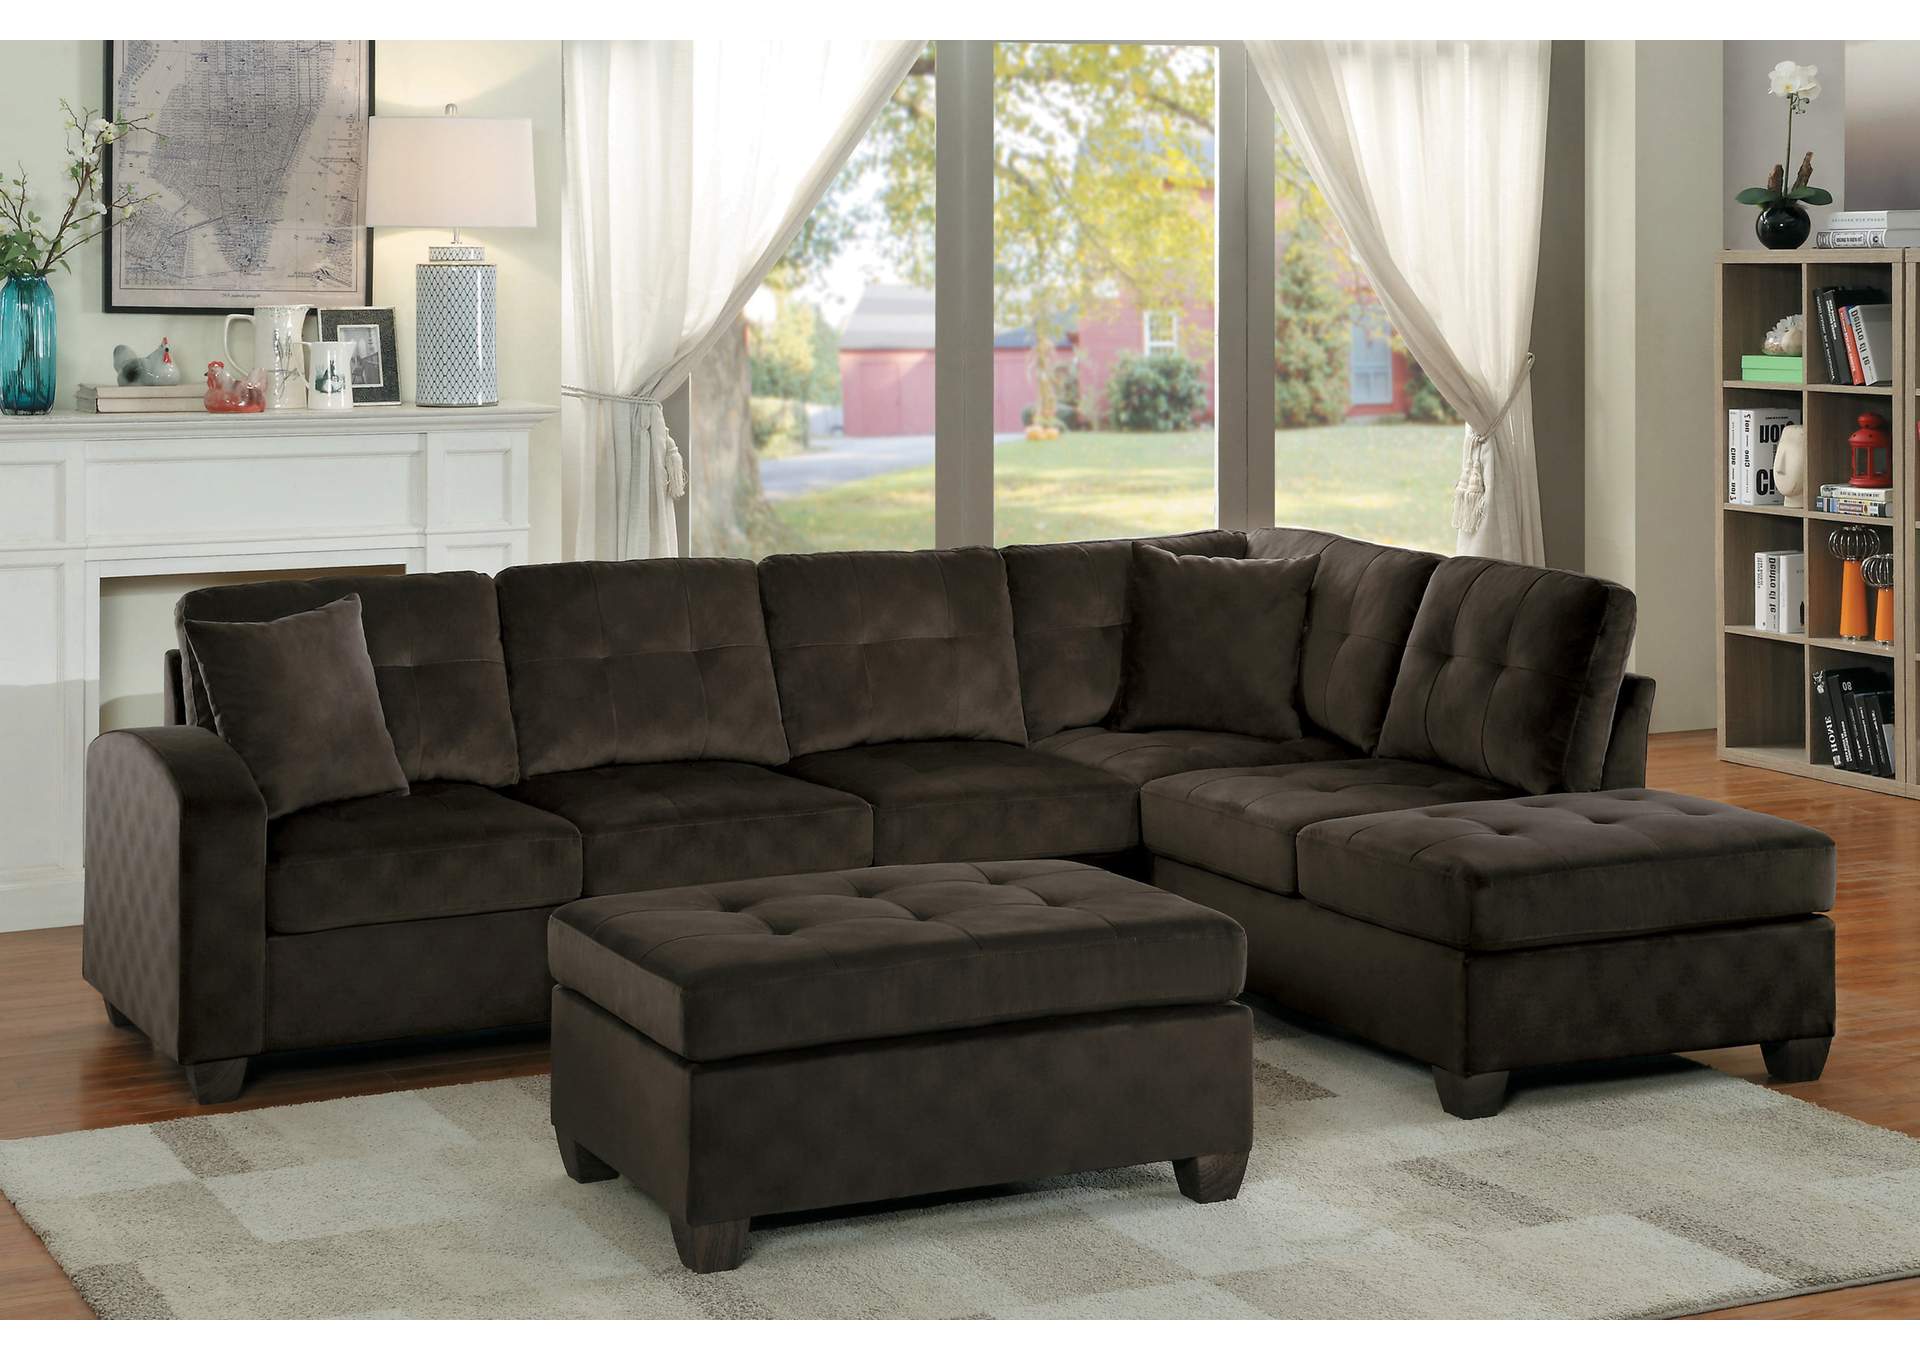 Chocolate 3-Piece Reversible Sectional with Ottoman,Homelegance